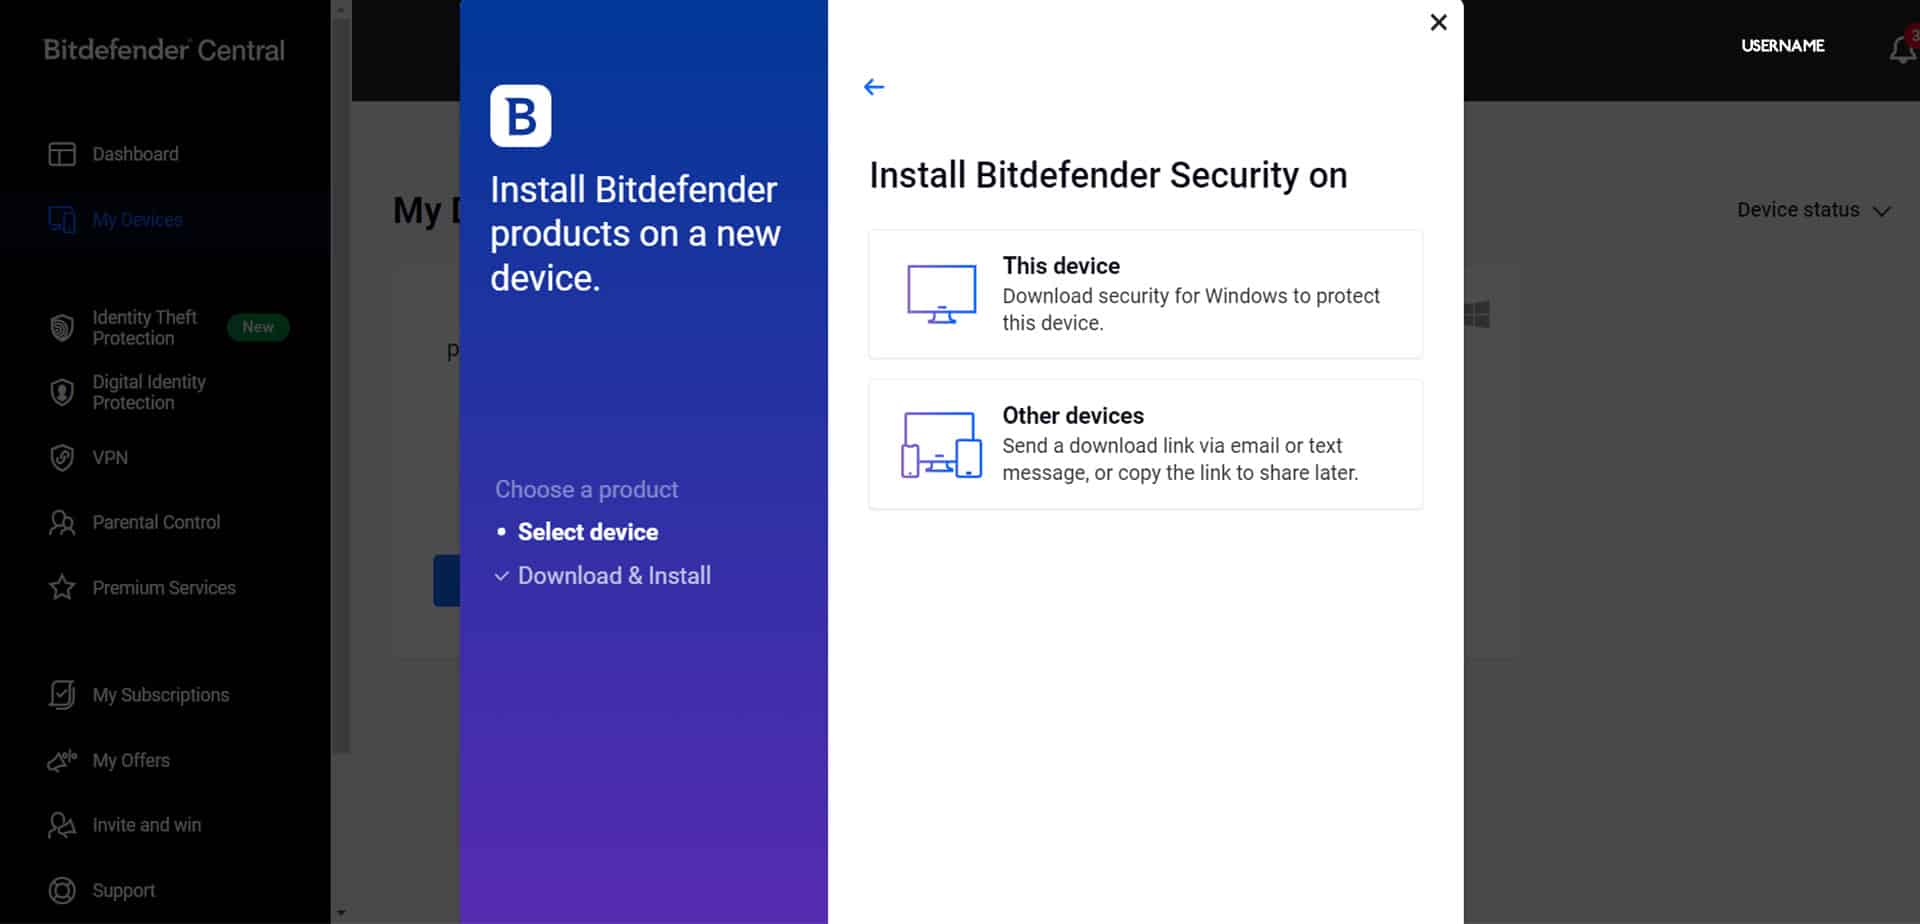 Bitdefender Panel Displays All Your Devices for Easy Control and Management